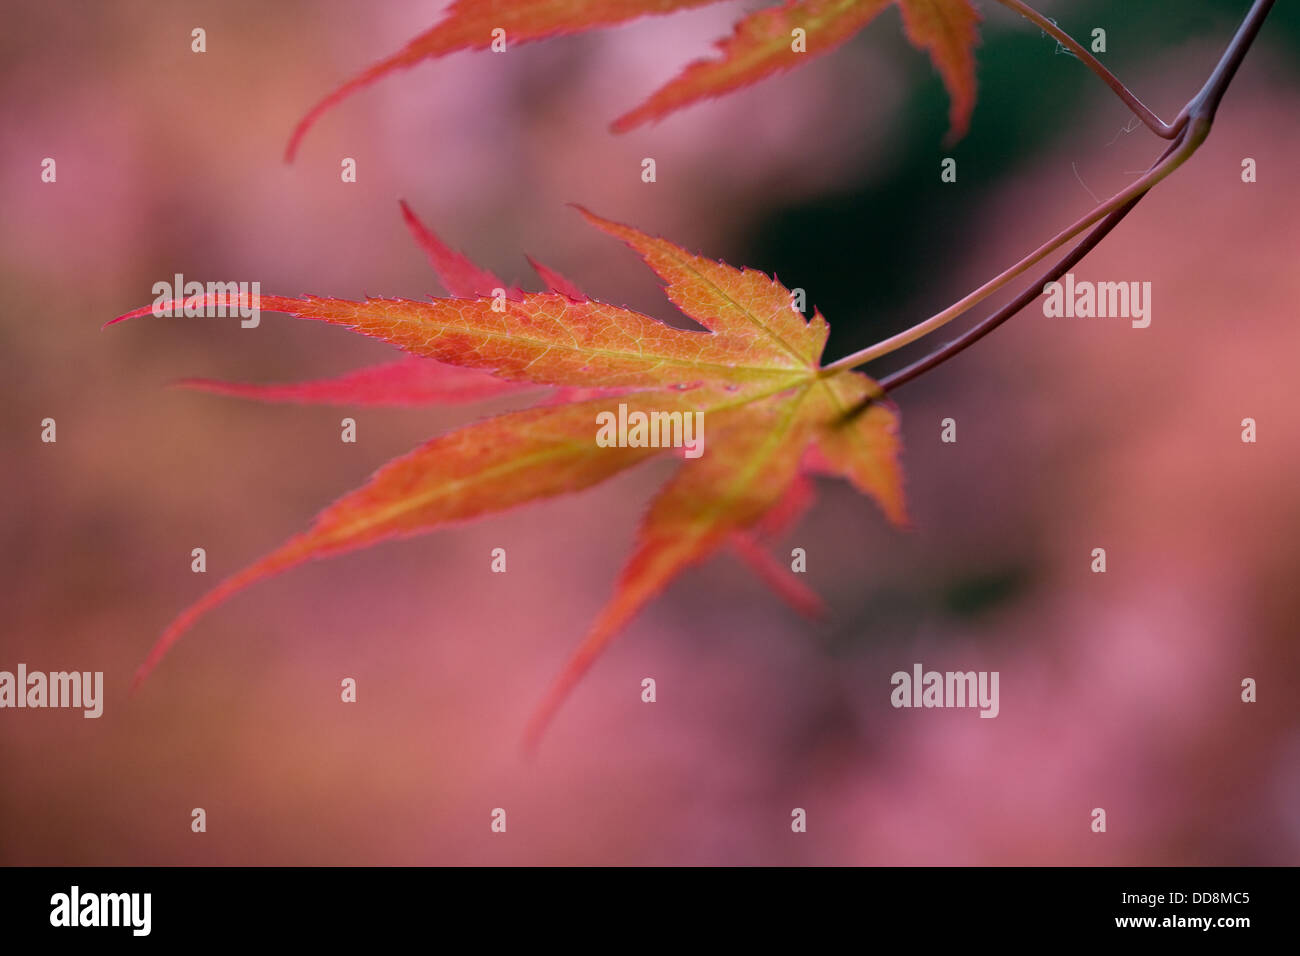 Red Acer leaves, close up with shallow depth of field Stock Photo